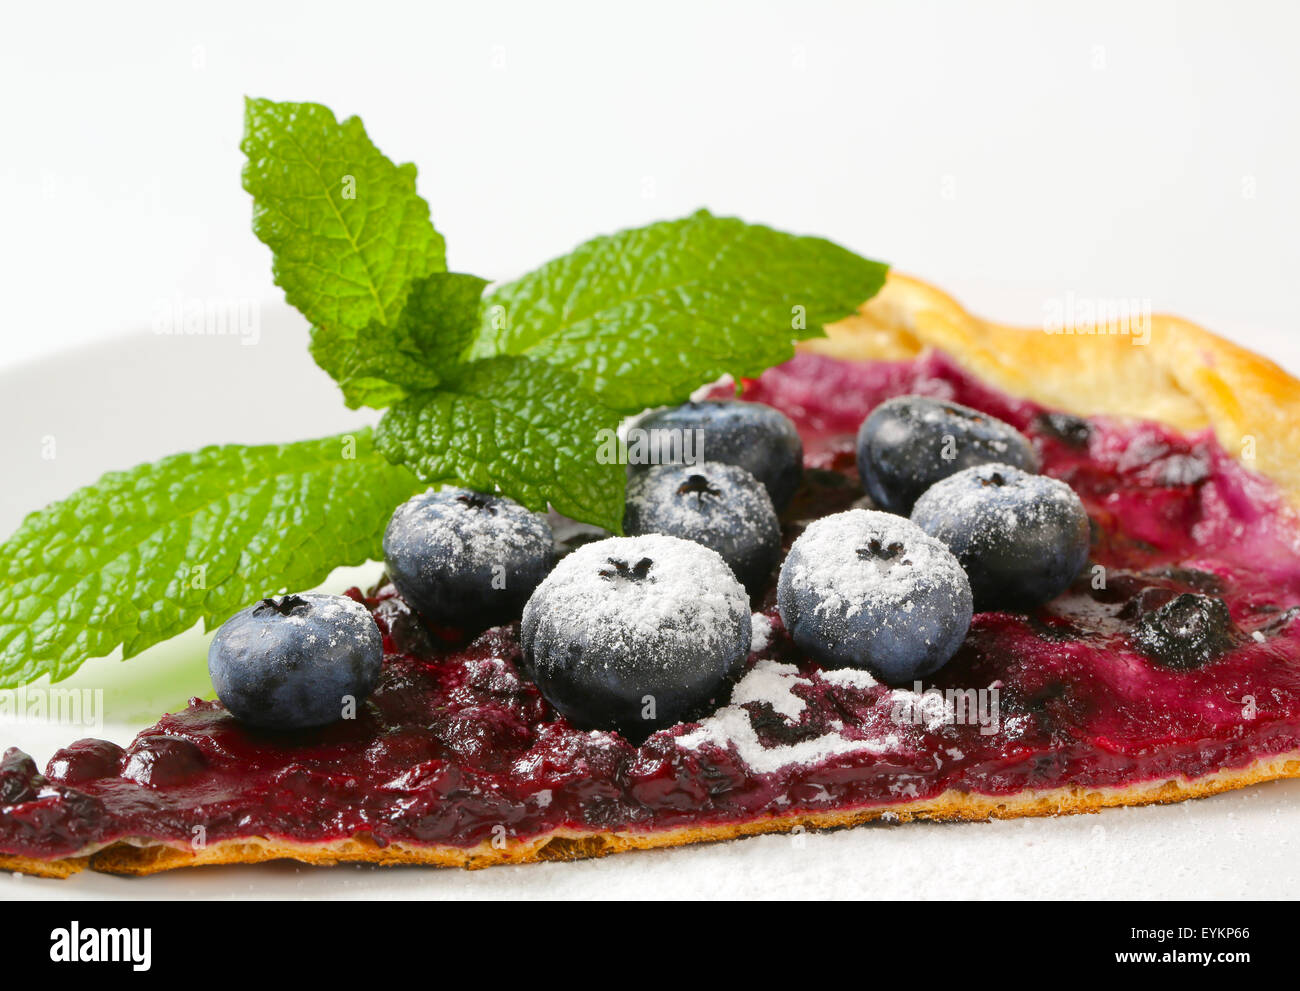 French cuisine - Quark and blueberry flammkuchen Stock Photo